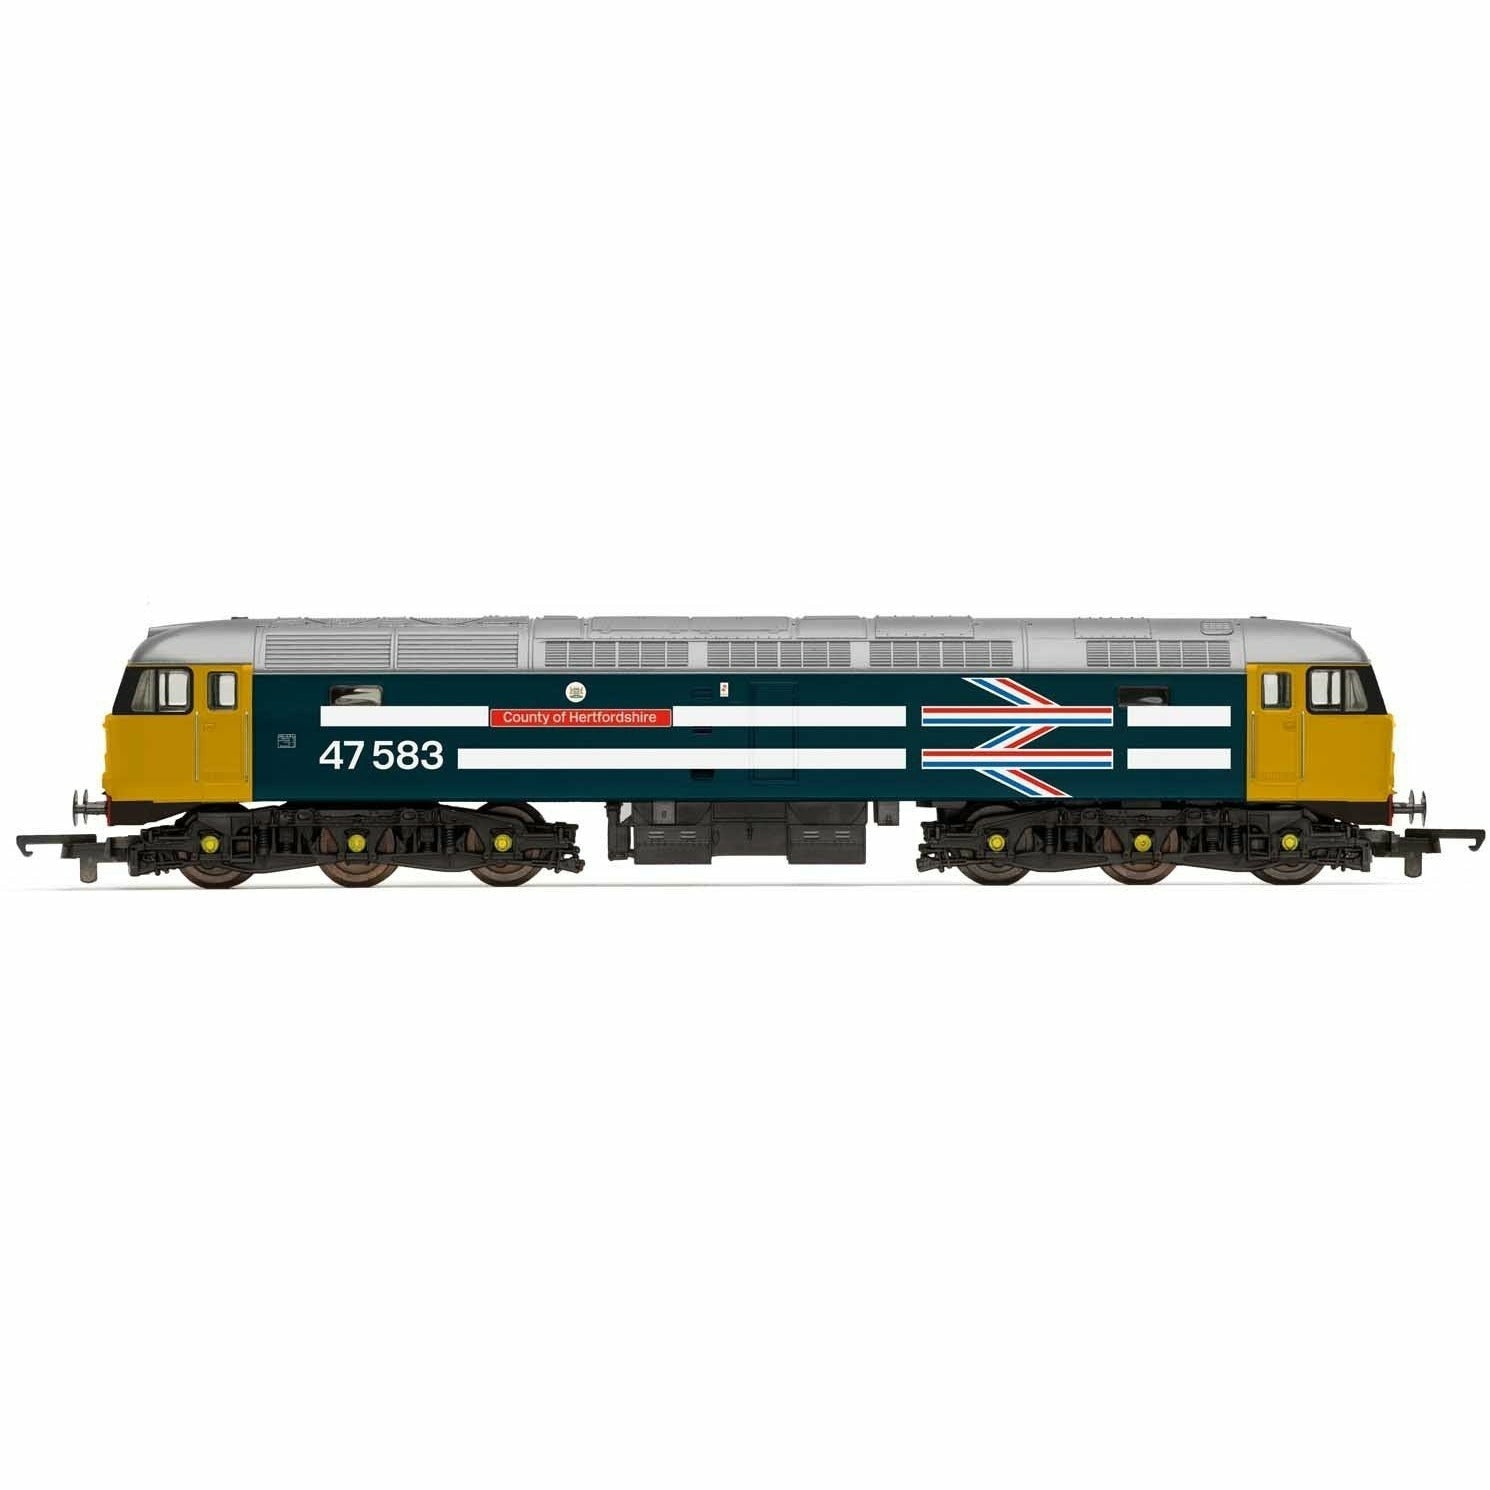 HORNBY BR, Class 47, Co-Co, 47583 County of Hertfordshire